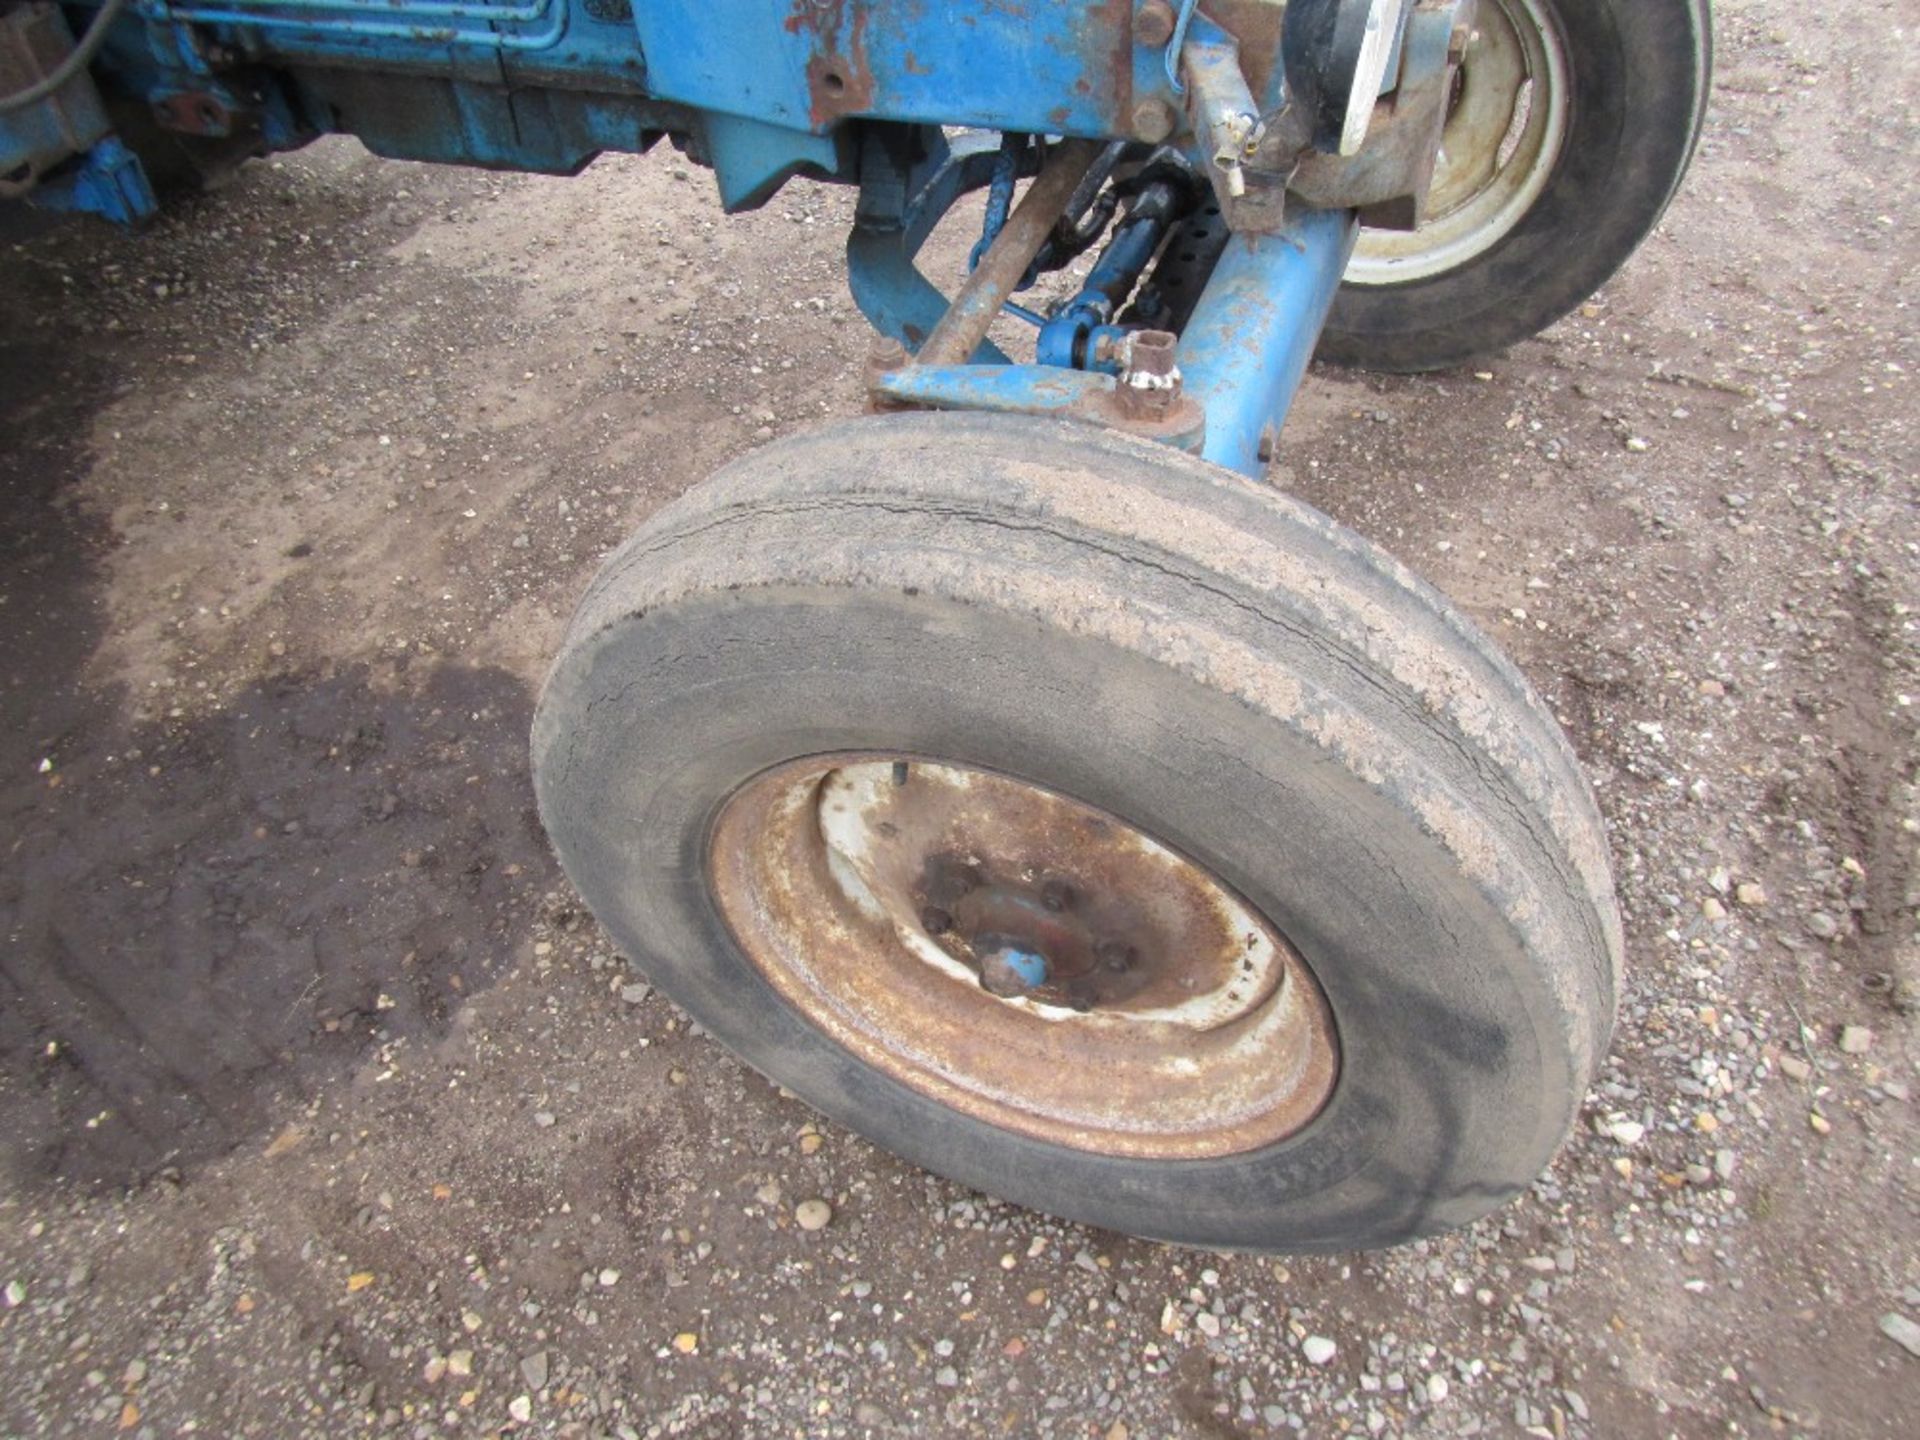 1977 Ford 6700 2wd Tractor c/w dual power, aux fuel tank & V5 Reg. No. VKX 8195 - Image 4 of 17